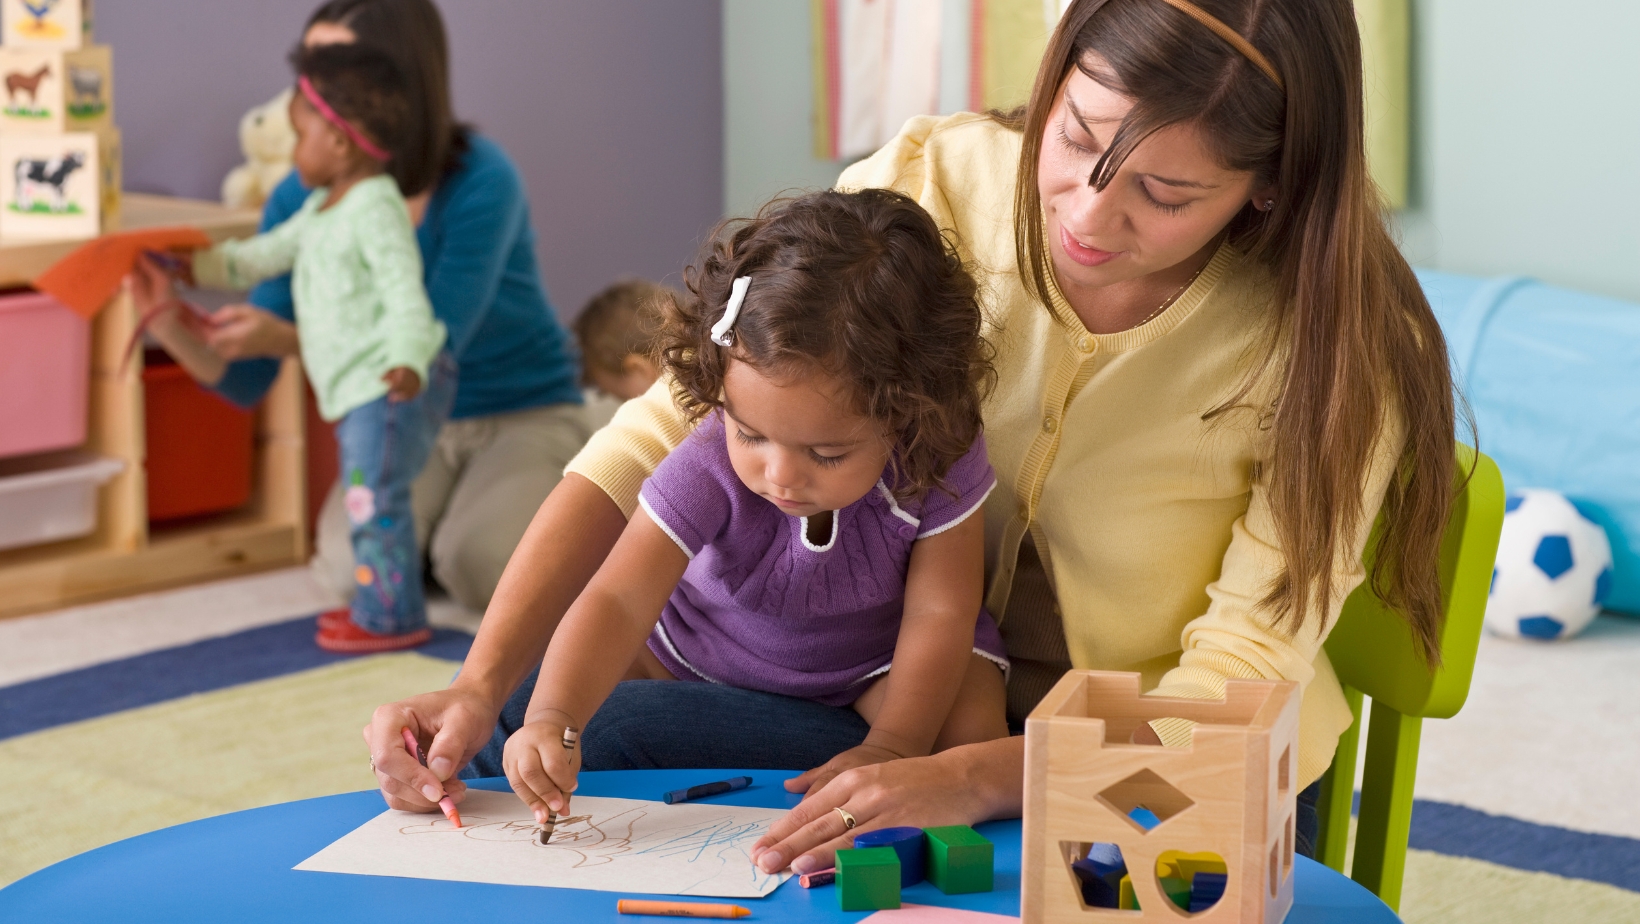 which is not an essential characteristic of high-quality day care